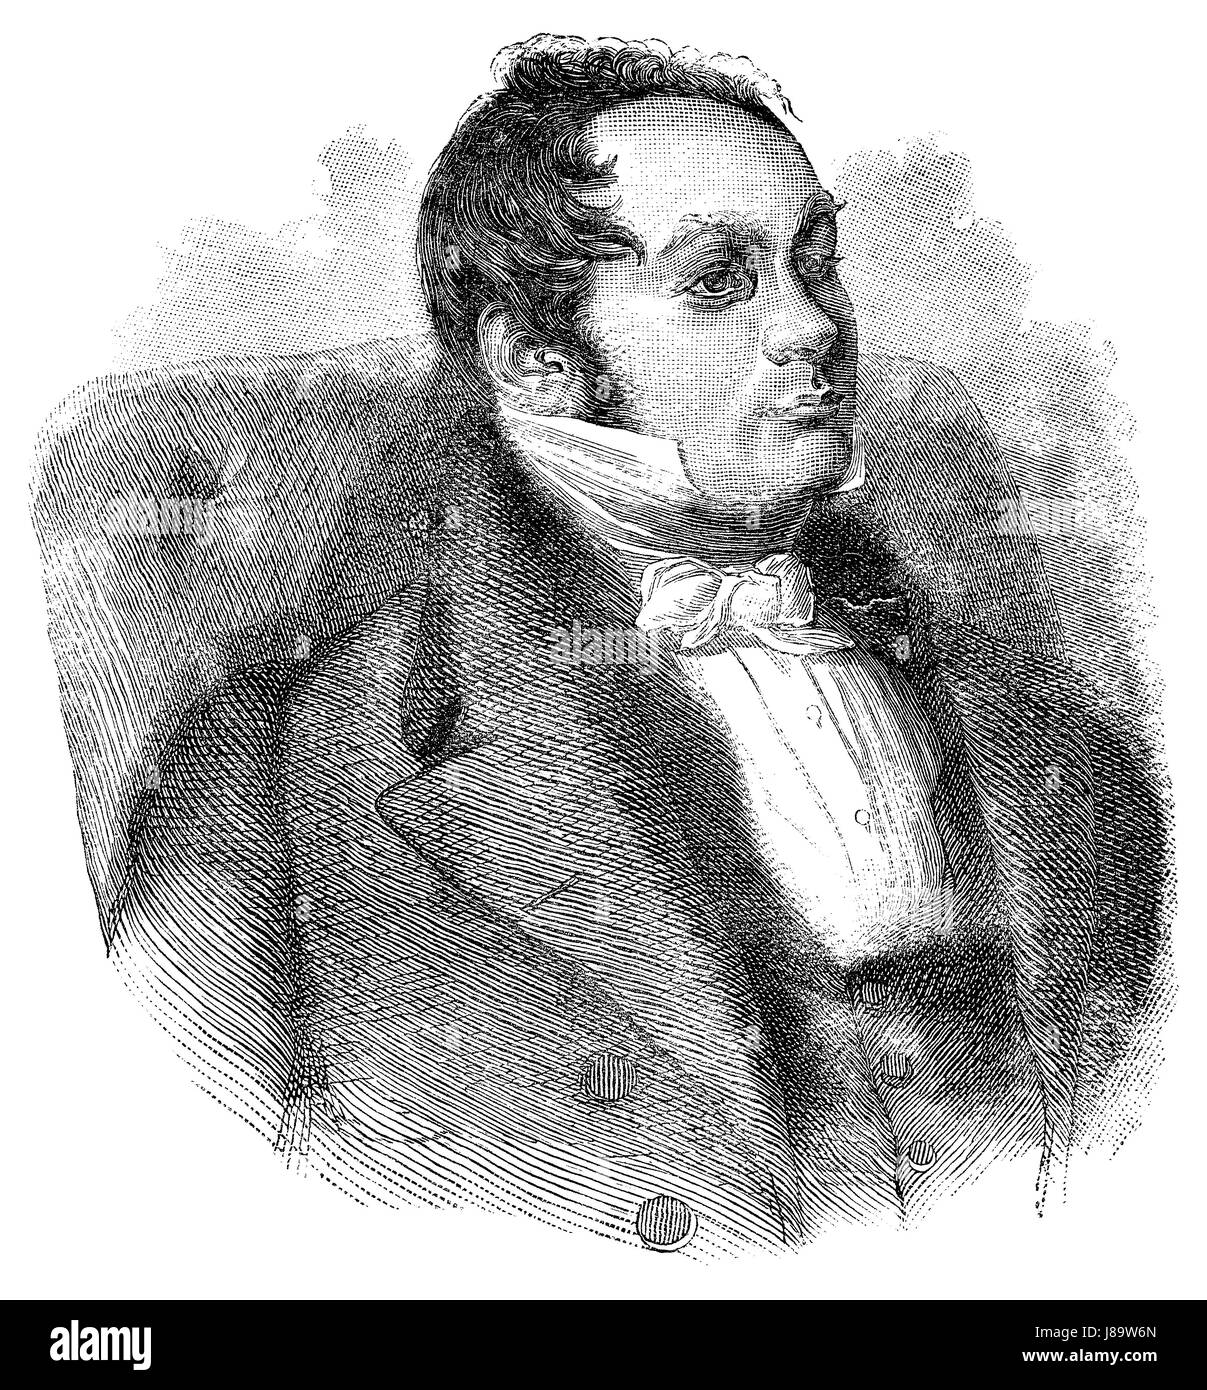 Victorian engraving of a portrait of the English cleric John Harris Barham (1788-1845), who wrote The Ingoldsby Legends under the pseudonym Thomas Ingoldsby. Stock Photo